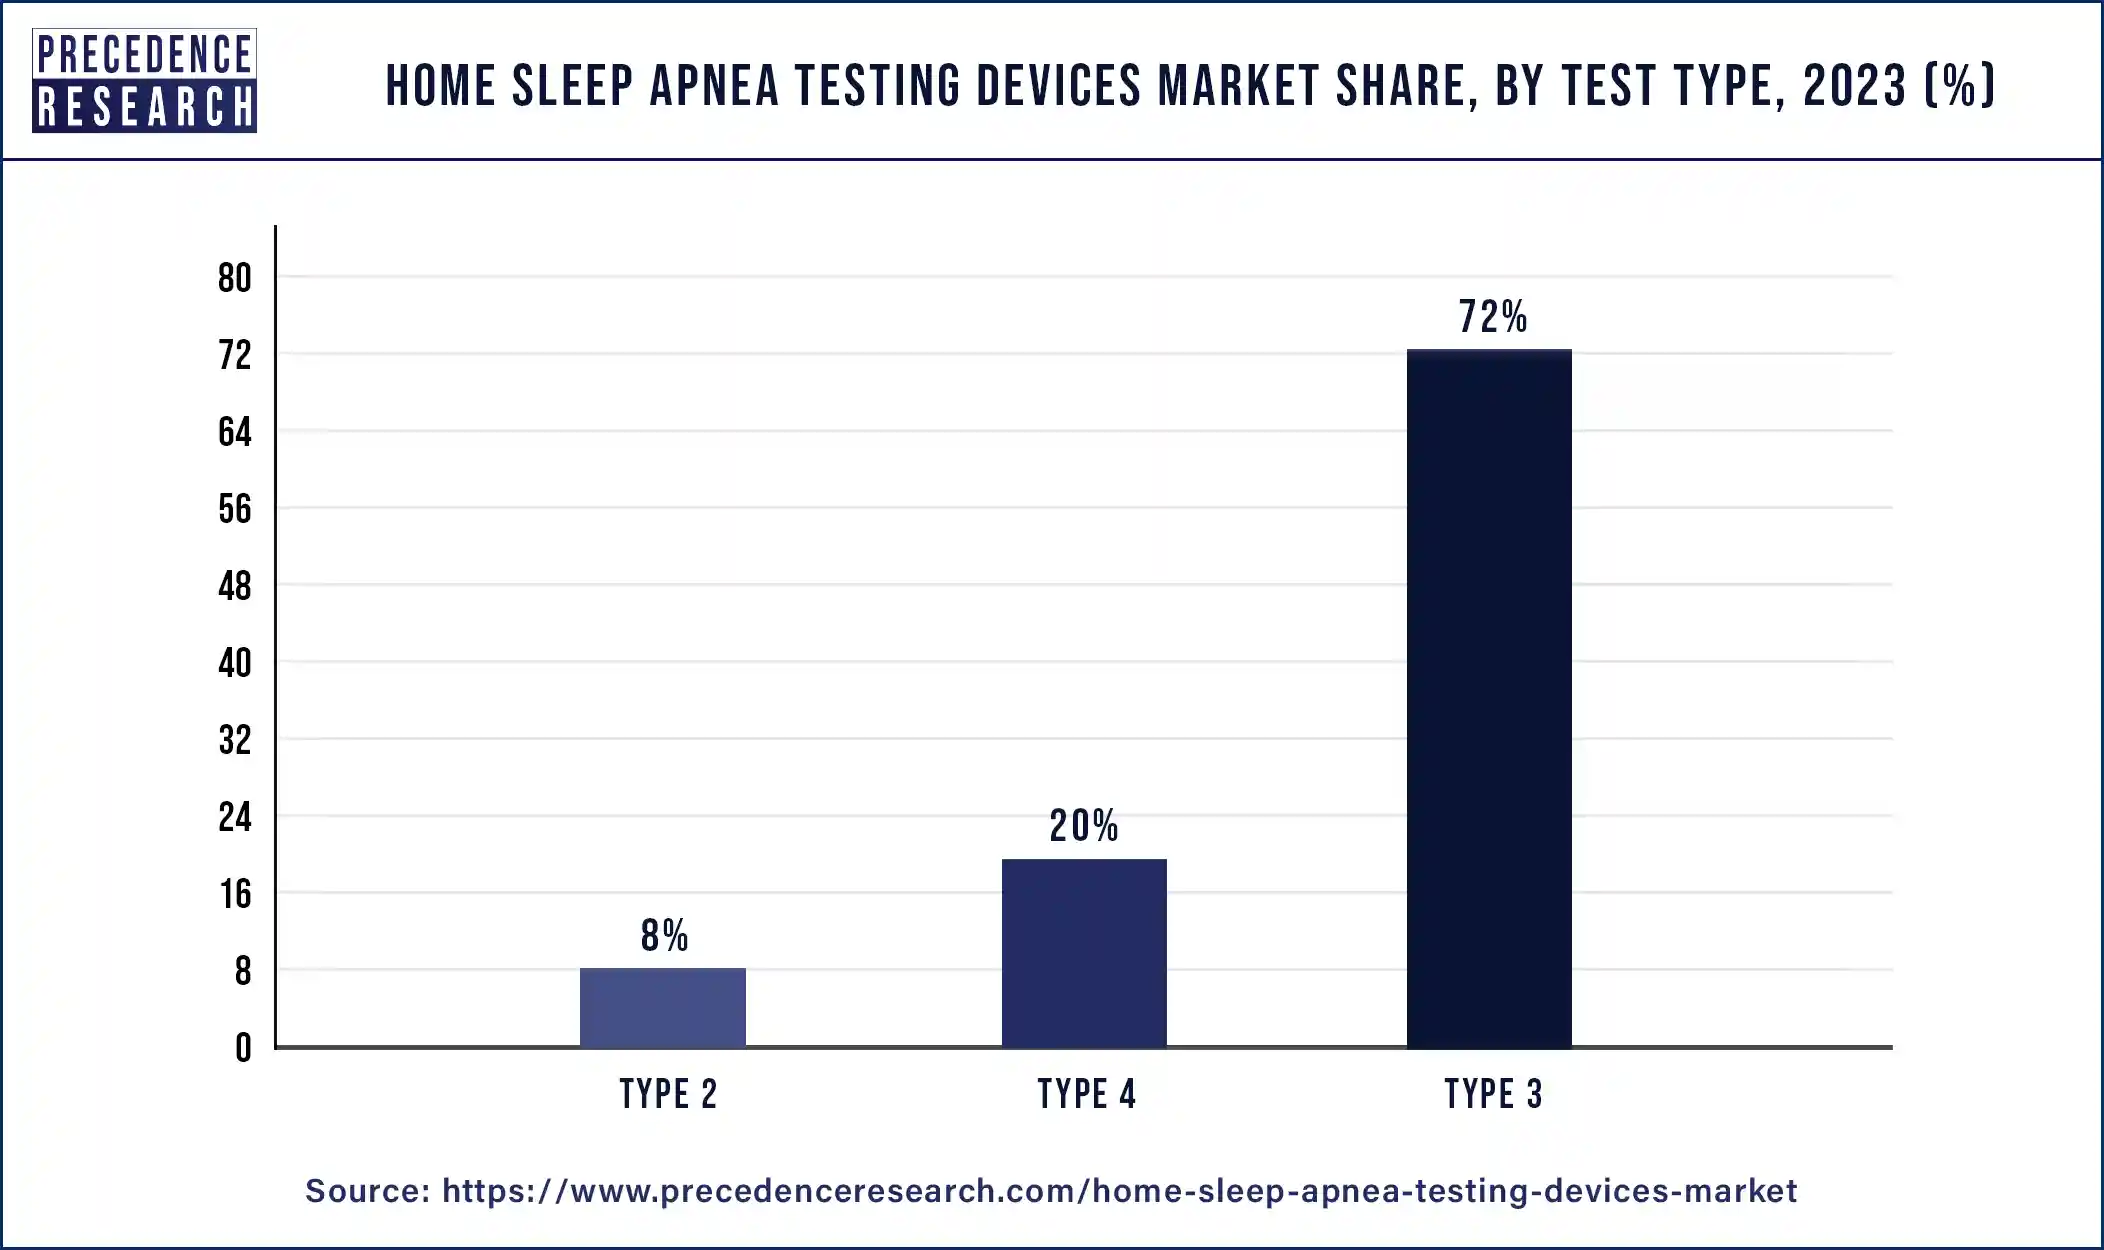 Home Sleep Apnea Testing Devices Market Share, By Test Type, 2023 (%)